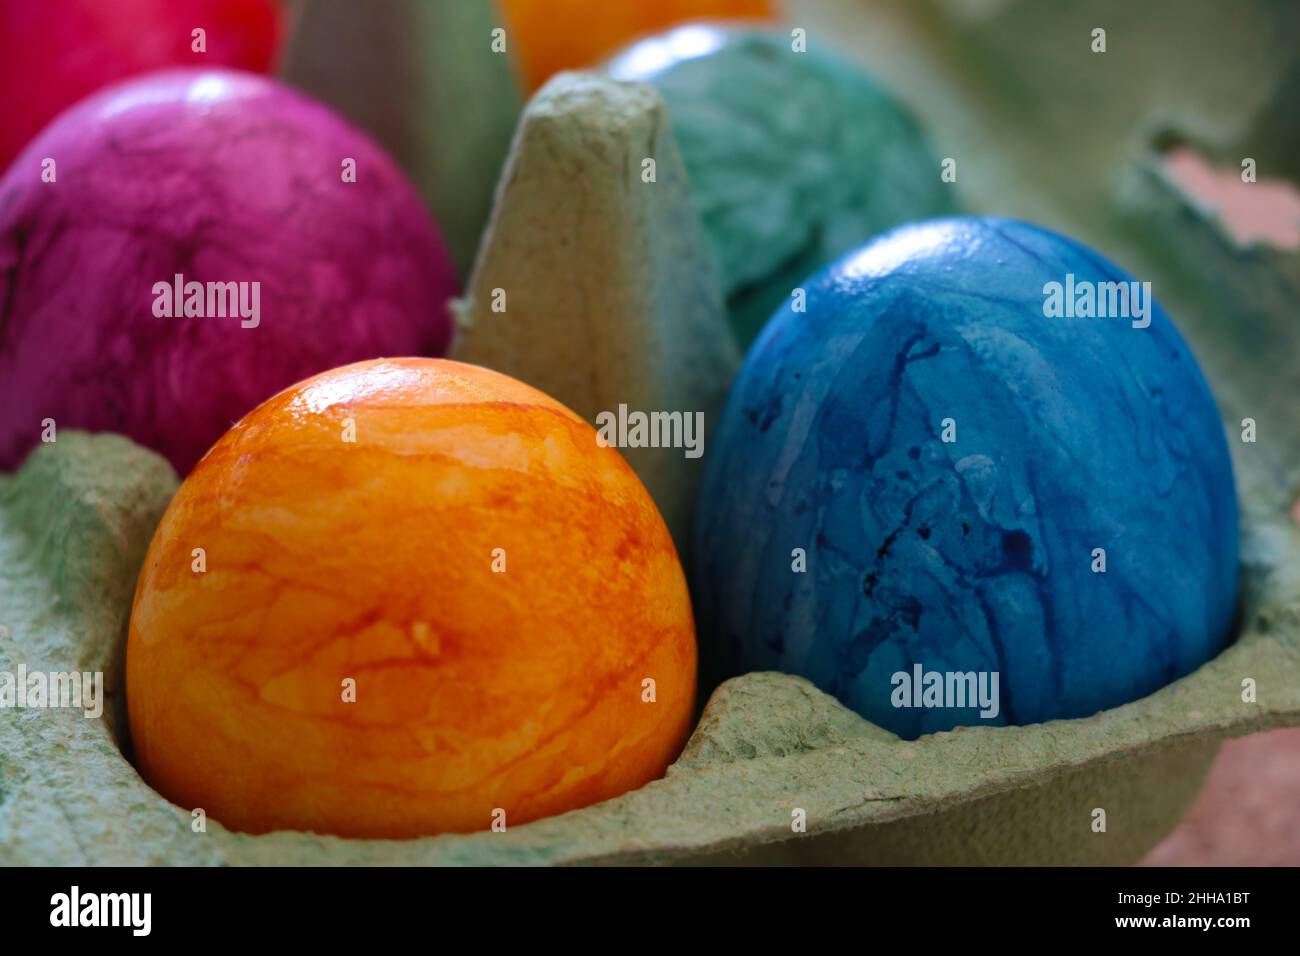 Beautiful multi-colored boiled eggs in a package. Out of focus Stock Photo